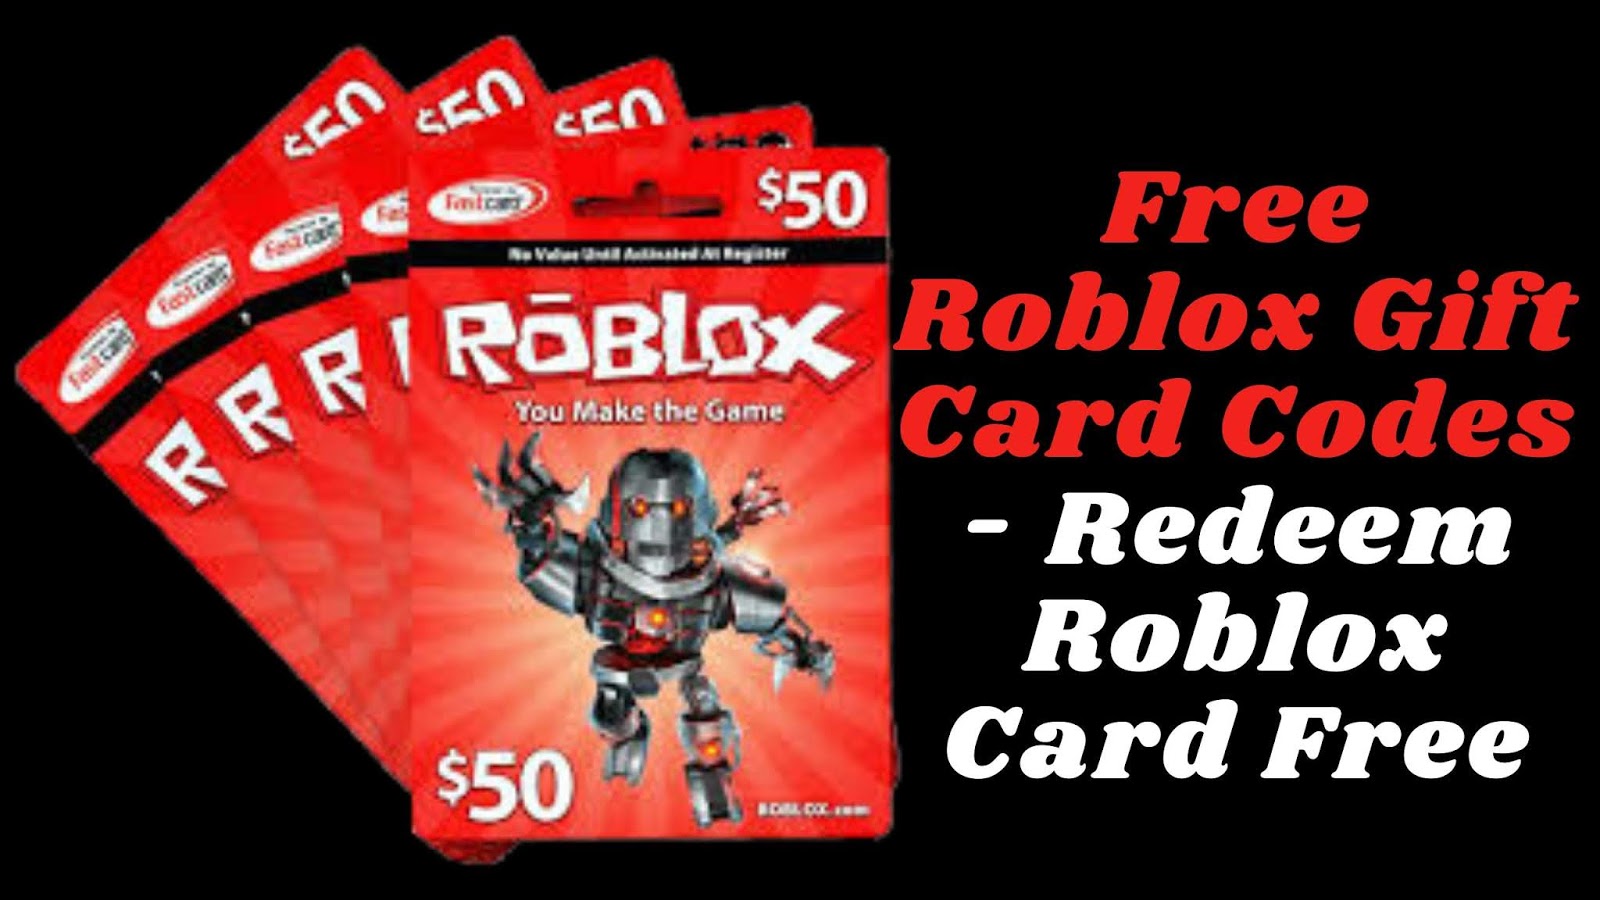 Free Gift Cards Free Roblox Gift Card Codes Redeem Roblox Card Free - robux gift cards codes 2020